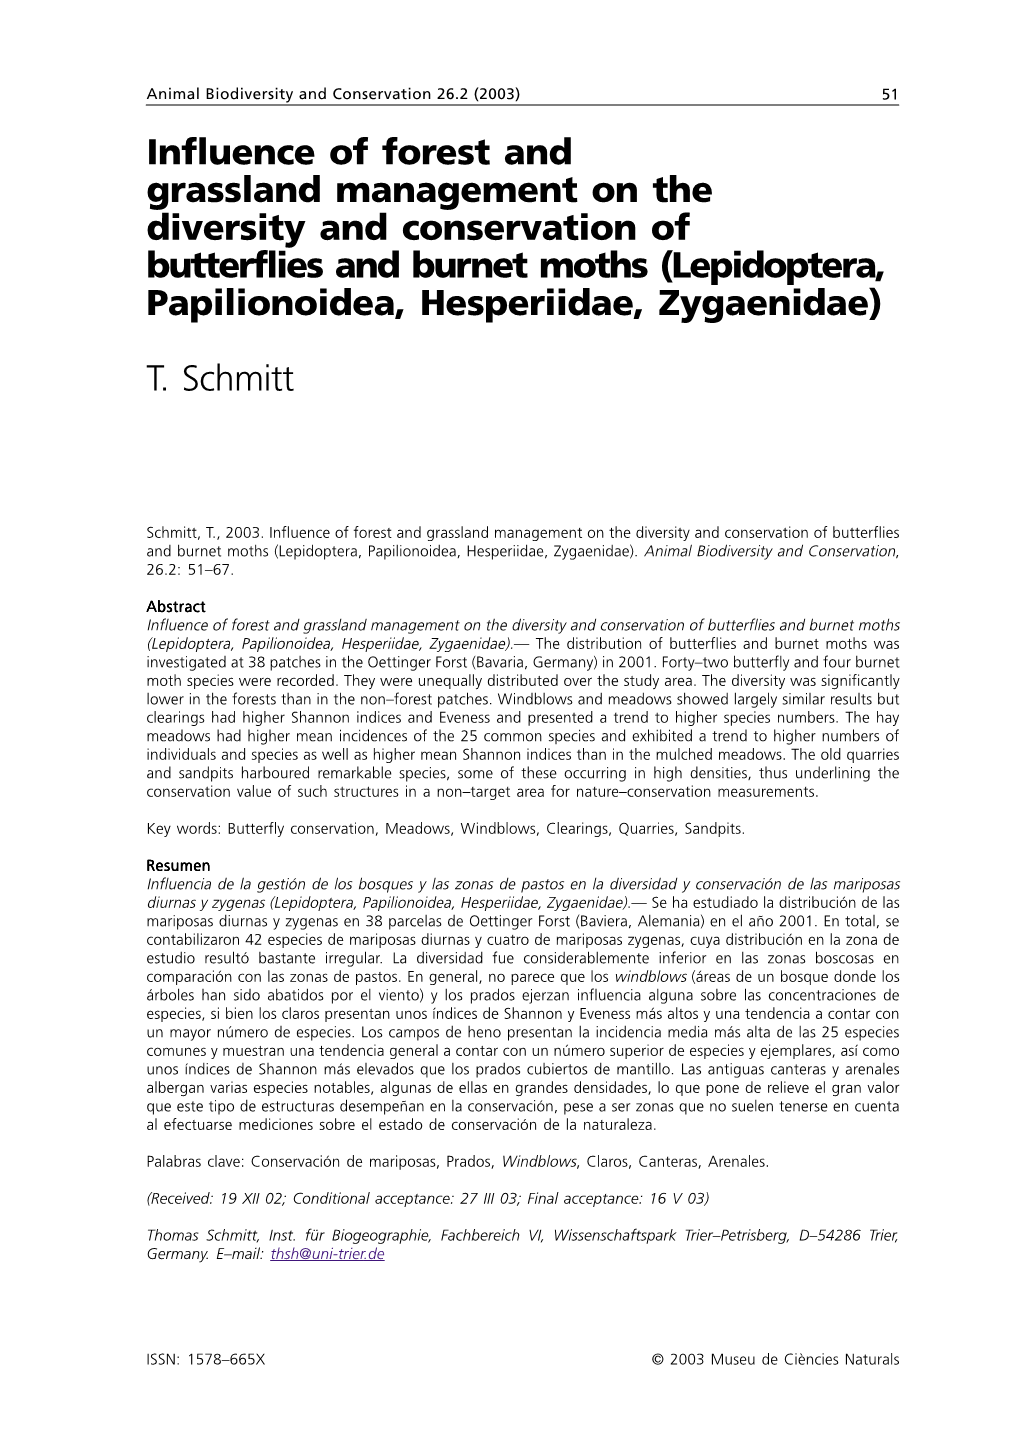 Influence of Forest and Grassland Management on the Diversity and Conservation of Butterflies and Burnet Moths (Lepidoptera, Papilionoidea, Hesperiidae, Zygaenidae)